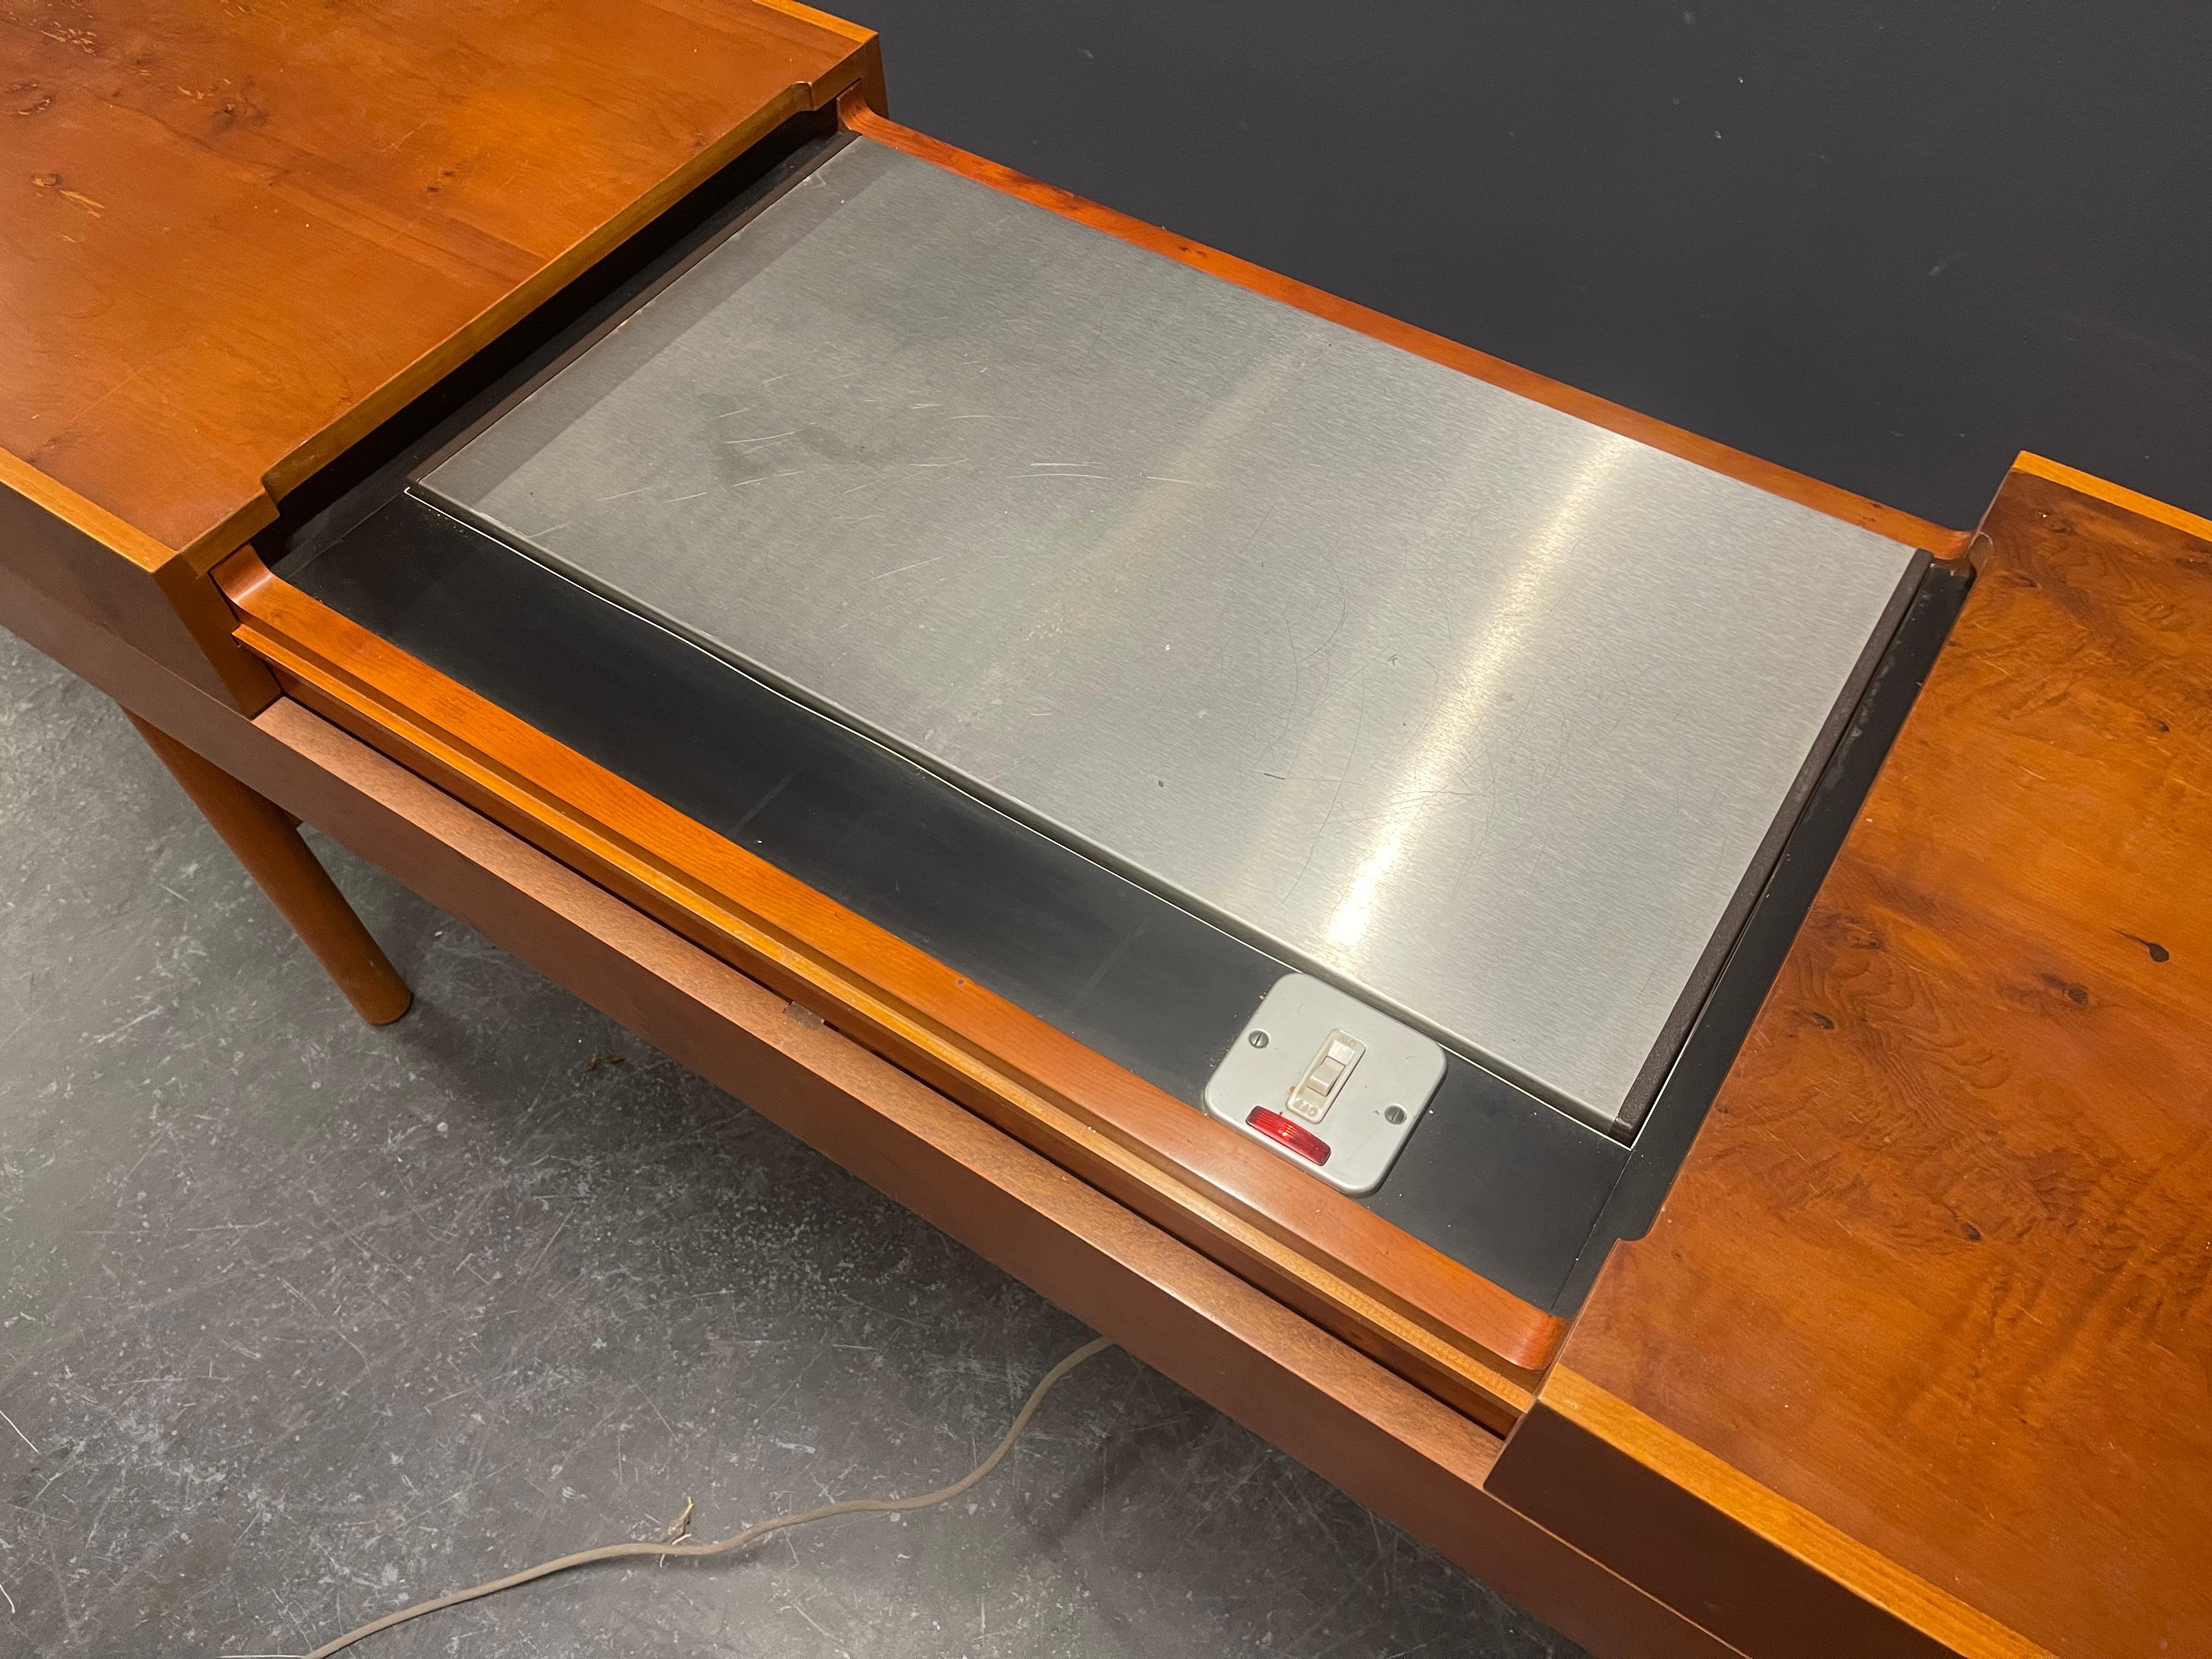 Designed by Robert Heritage and made for Heal's. Part of the Granville range. Amazing piece of furniture, four drawers for cutlery and a heating plate inside.
(Not tested - as it uses 110v).